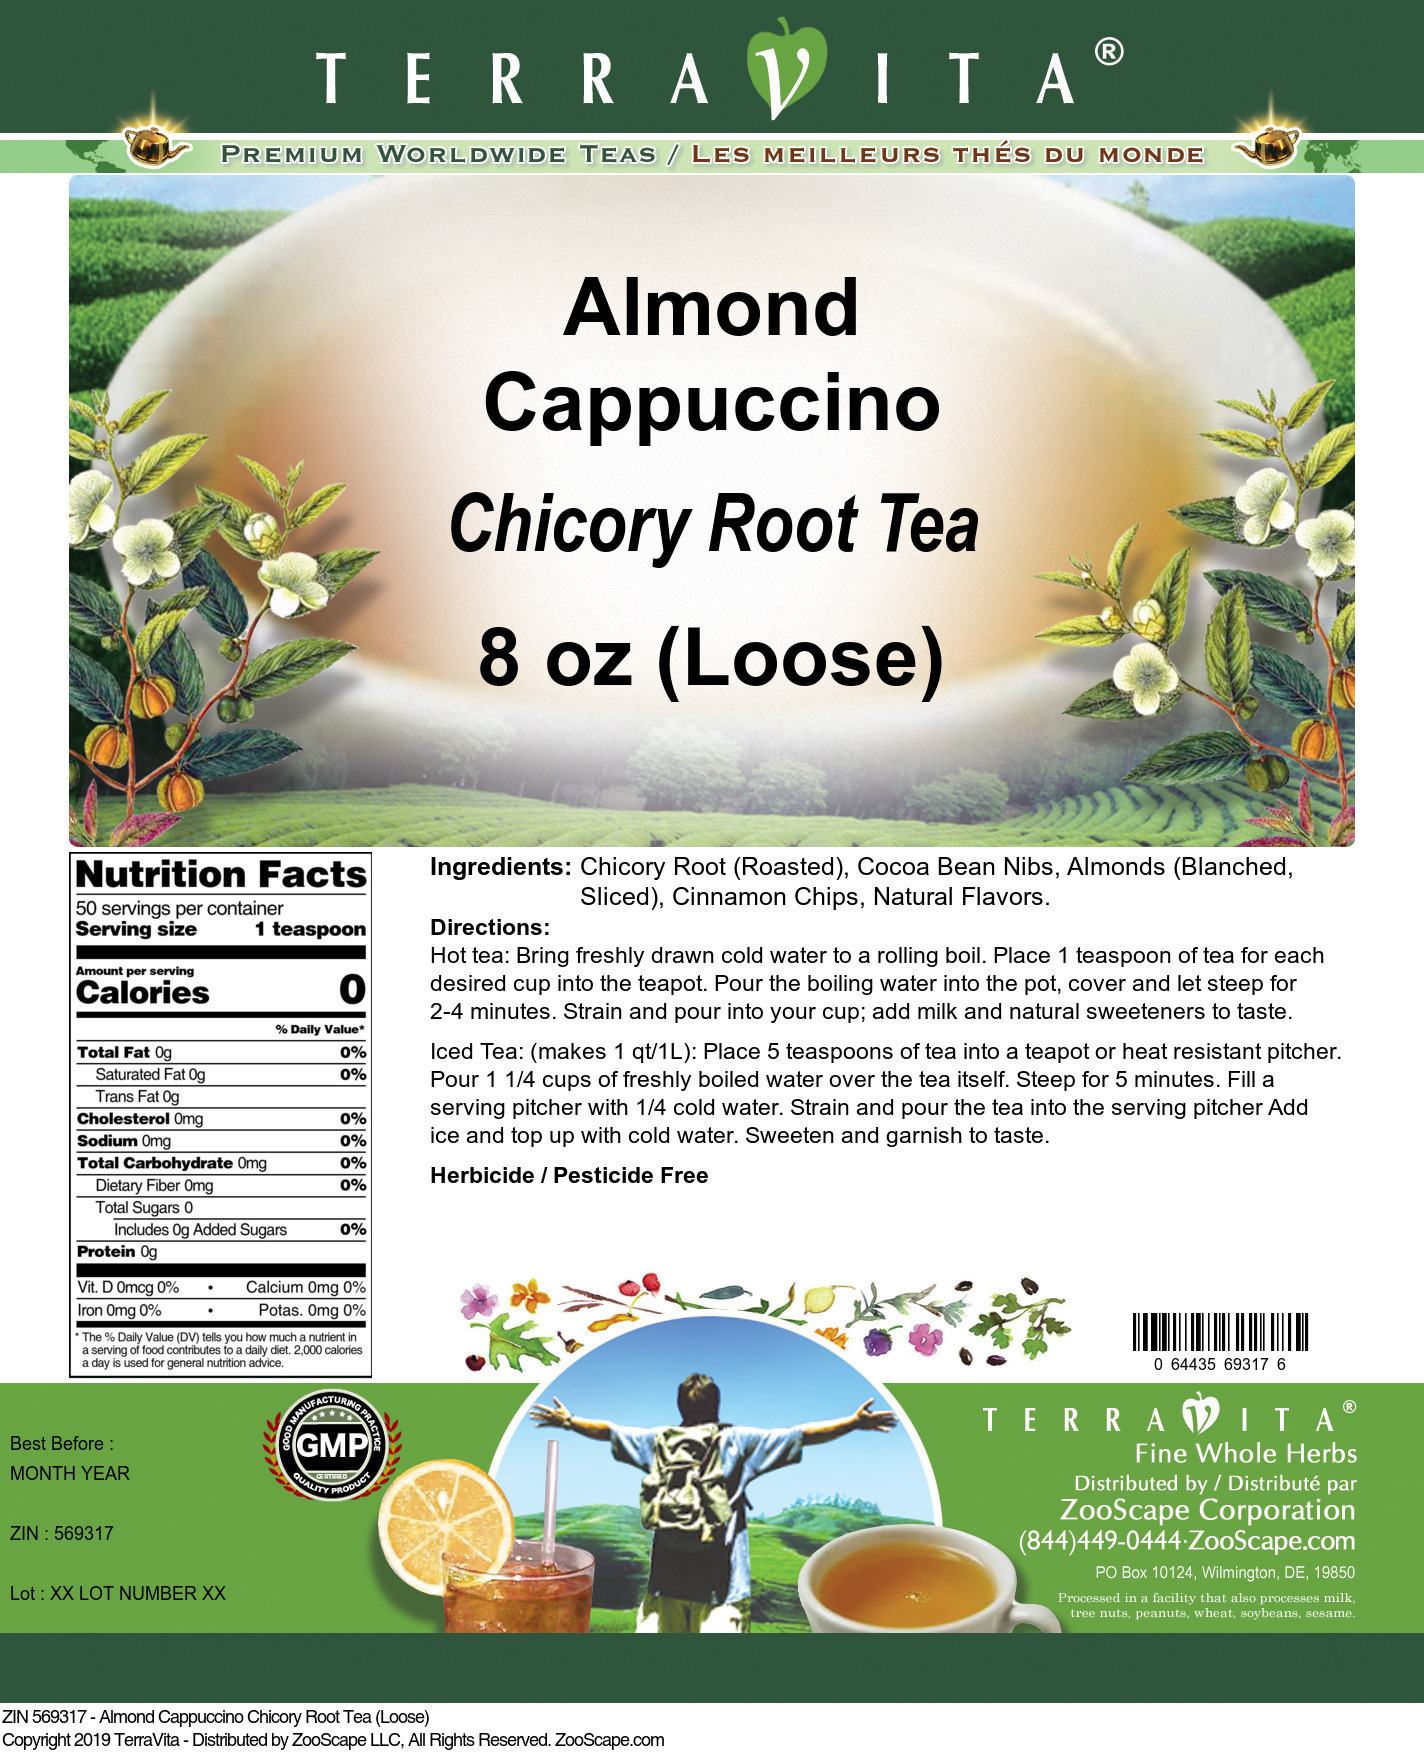 Almond Cappuccino Chicory Root Tea (Loose) - Label